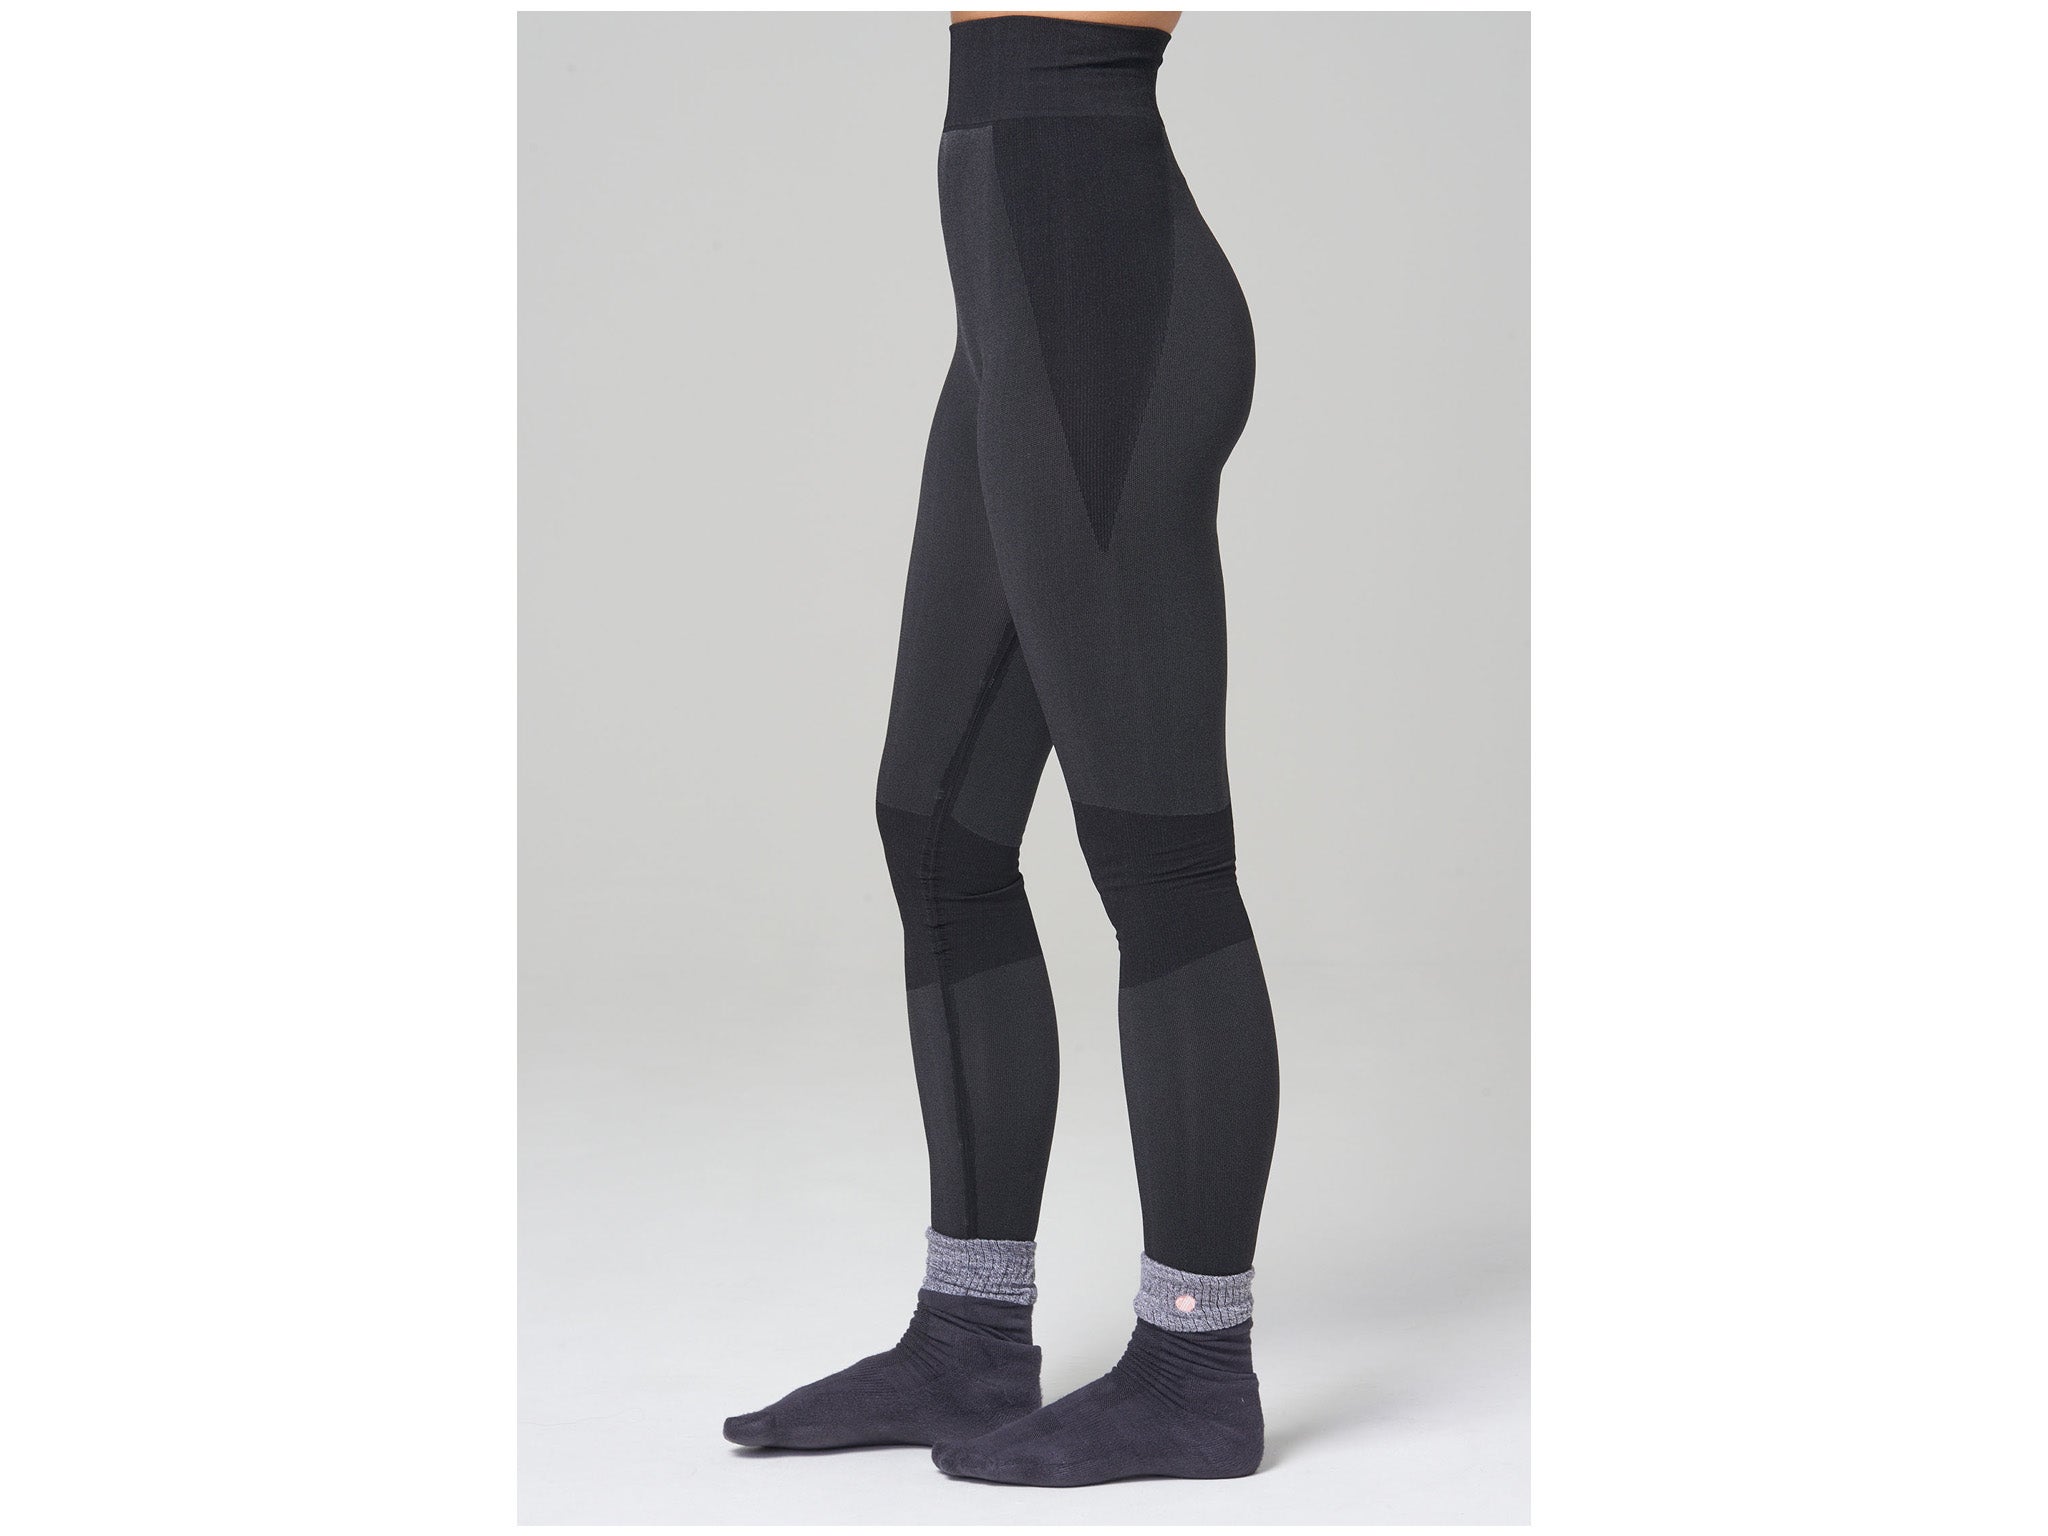 acai-seamless-tights-Indybest-review